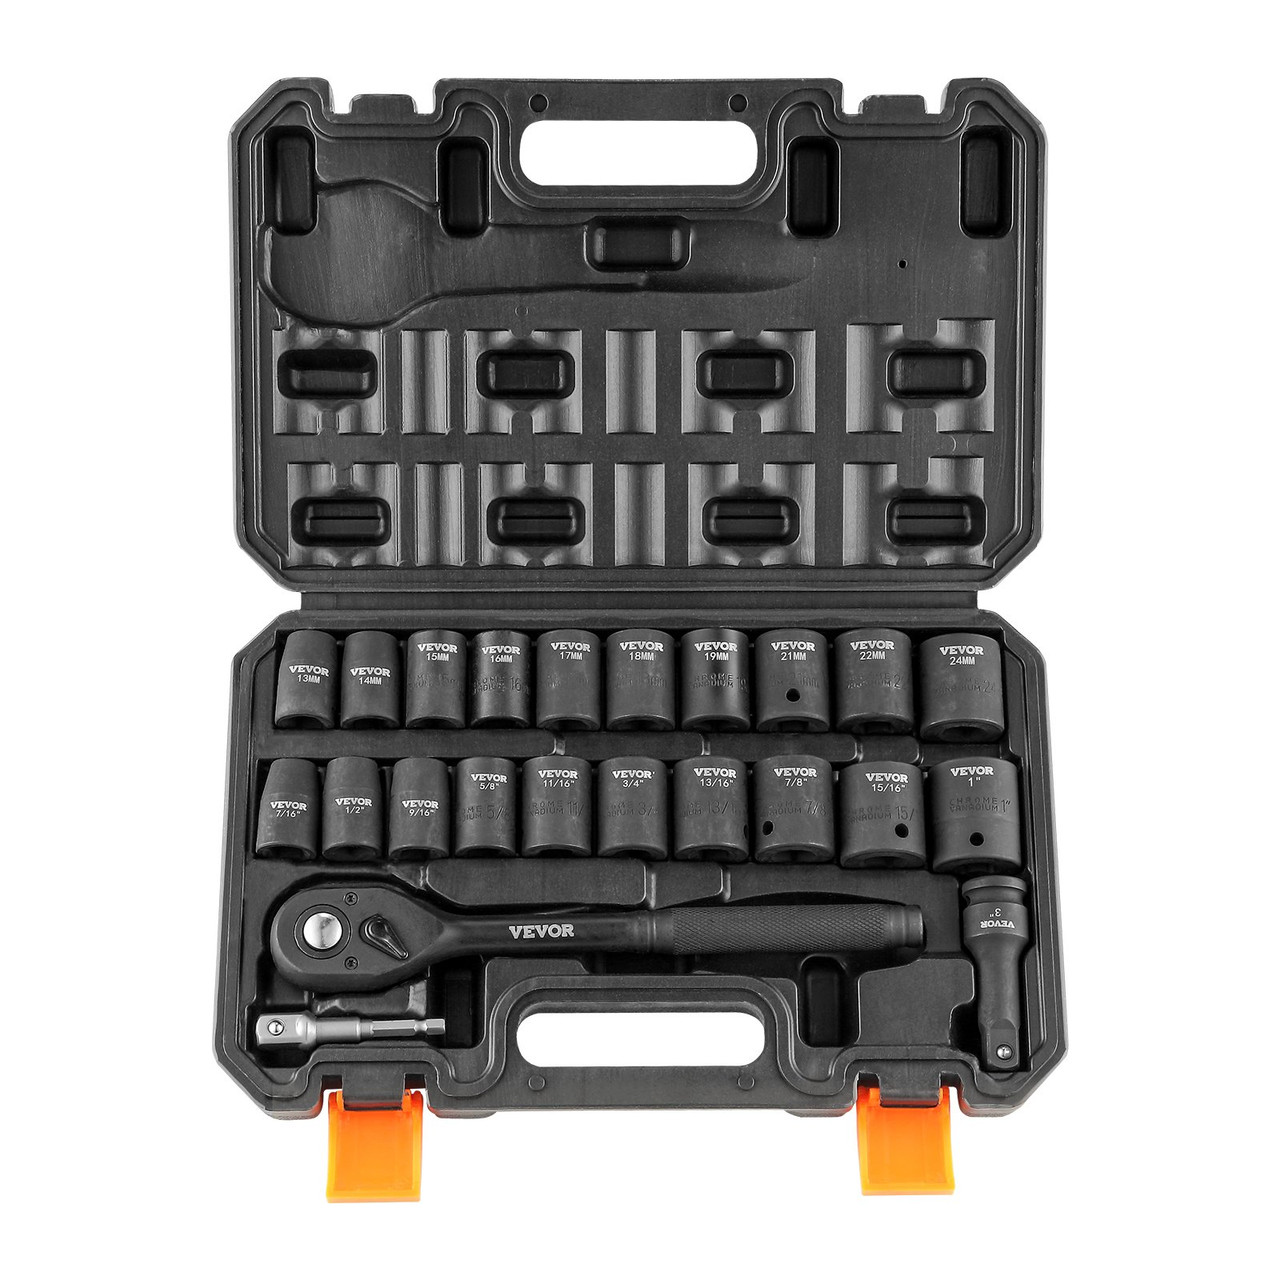 1/2" Drive Impact Socket Set, 23 Piece Socket Set SAE 7/16" -1" and Metric 13-24mm, 6 Point Cr-V Alloy Steel for Auto Repair, Easy-to-Read Size Markings, Rugged Construction, Storage Case